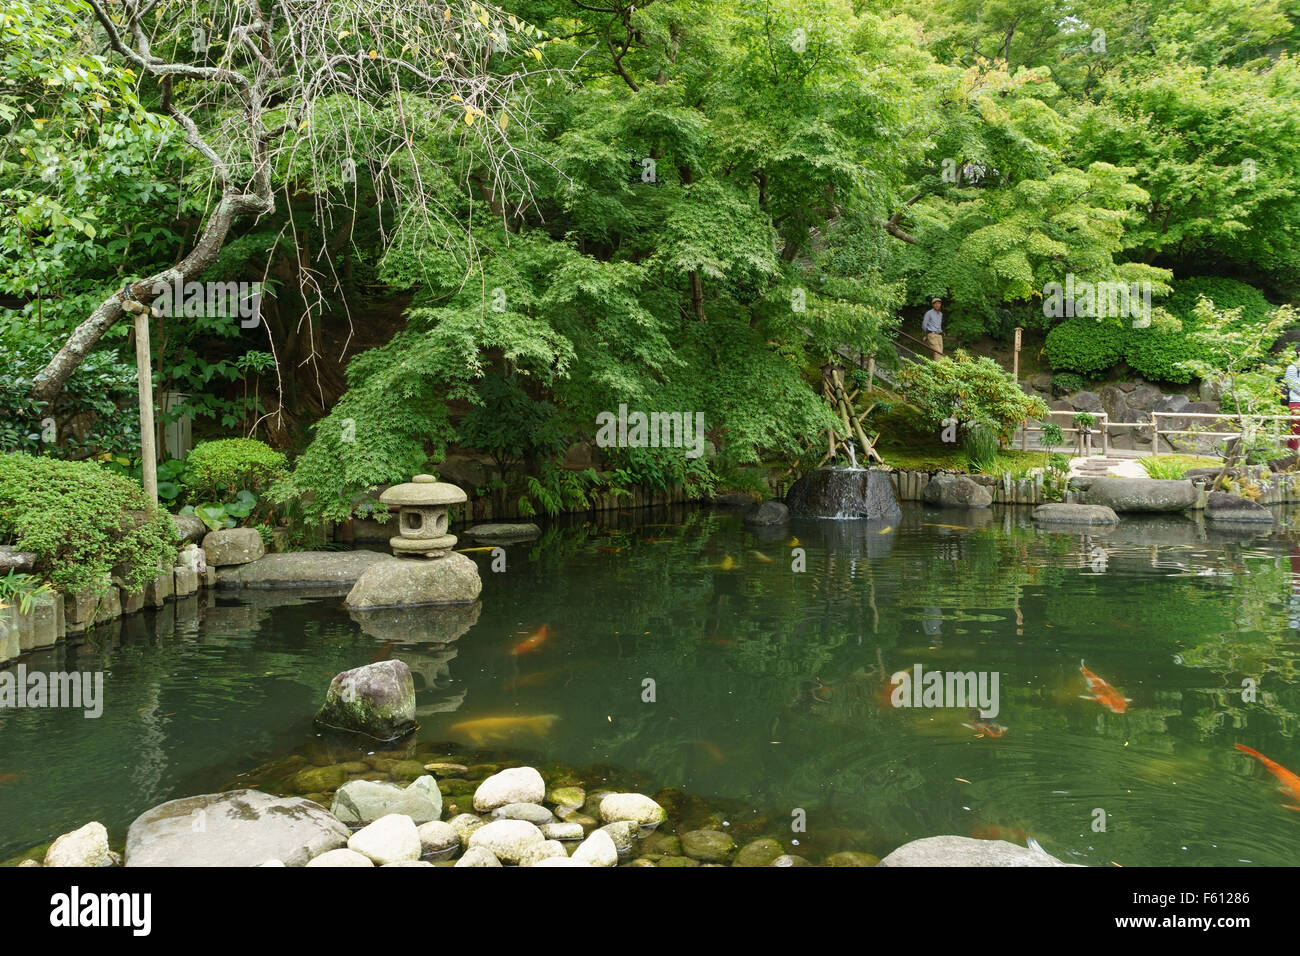 A traditional koi pond in a garden in Japan. Stock Photo